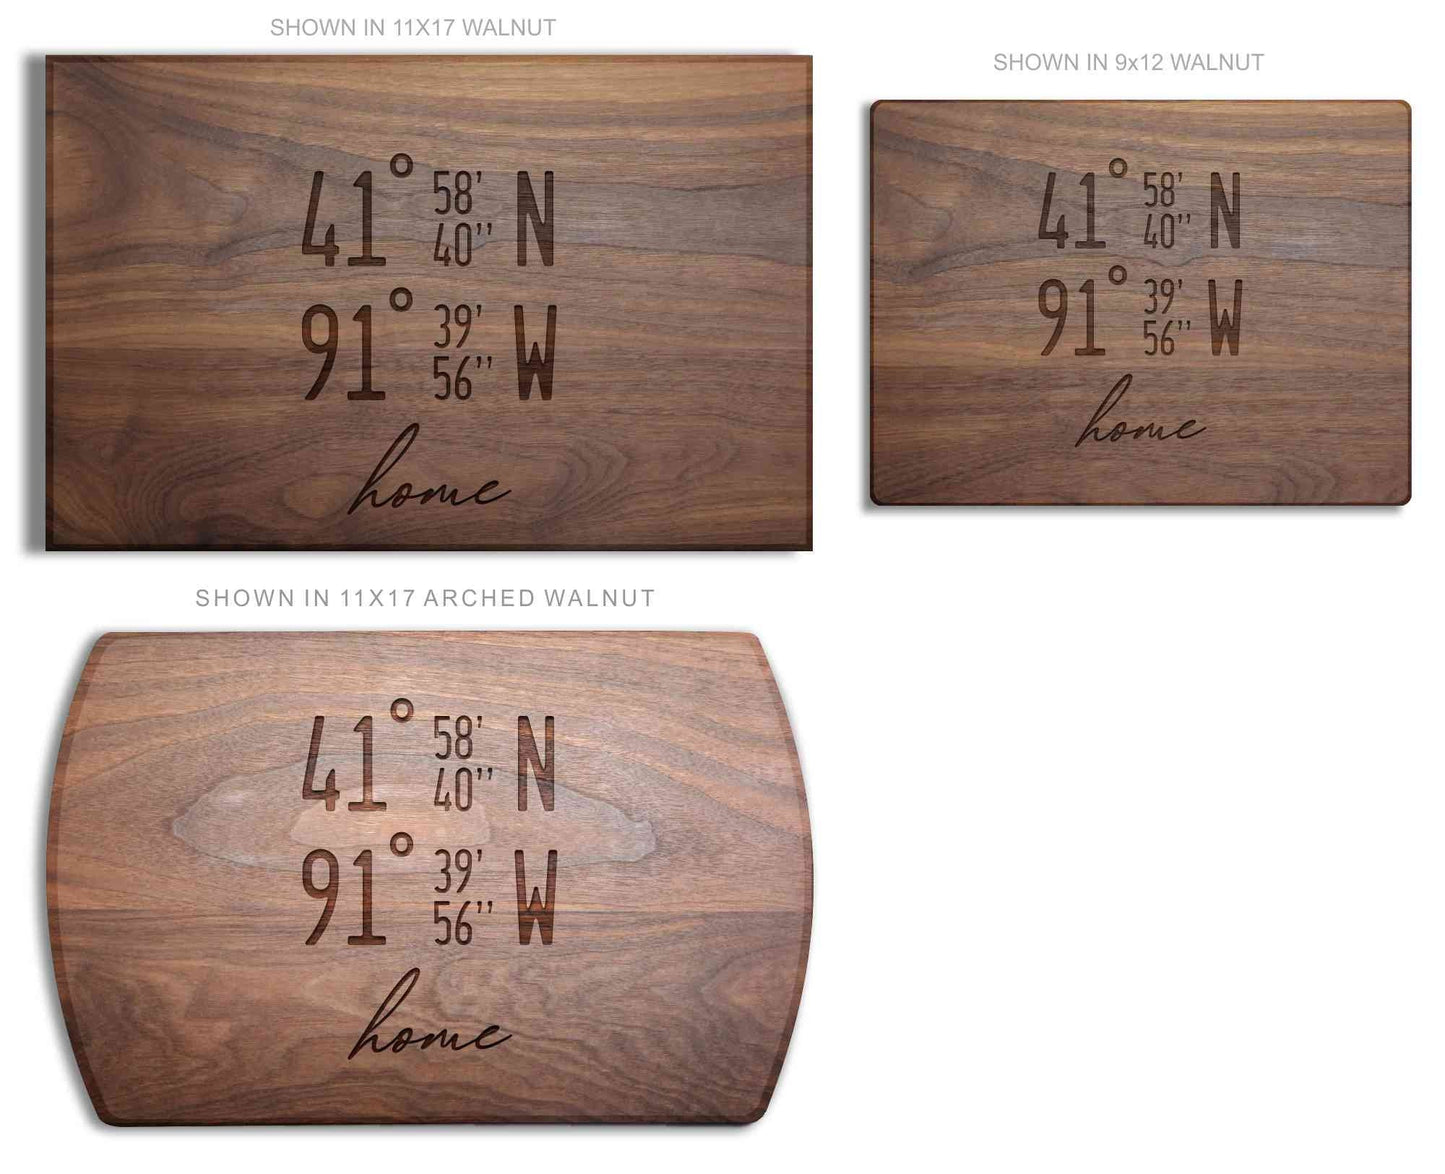 Personalized cutting board with GPS coordinates